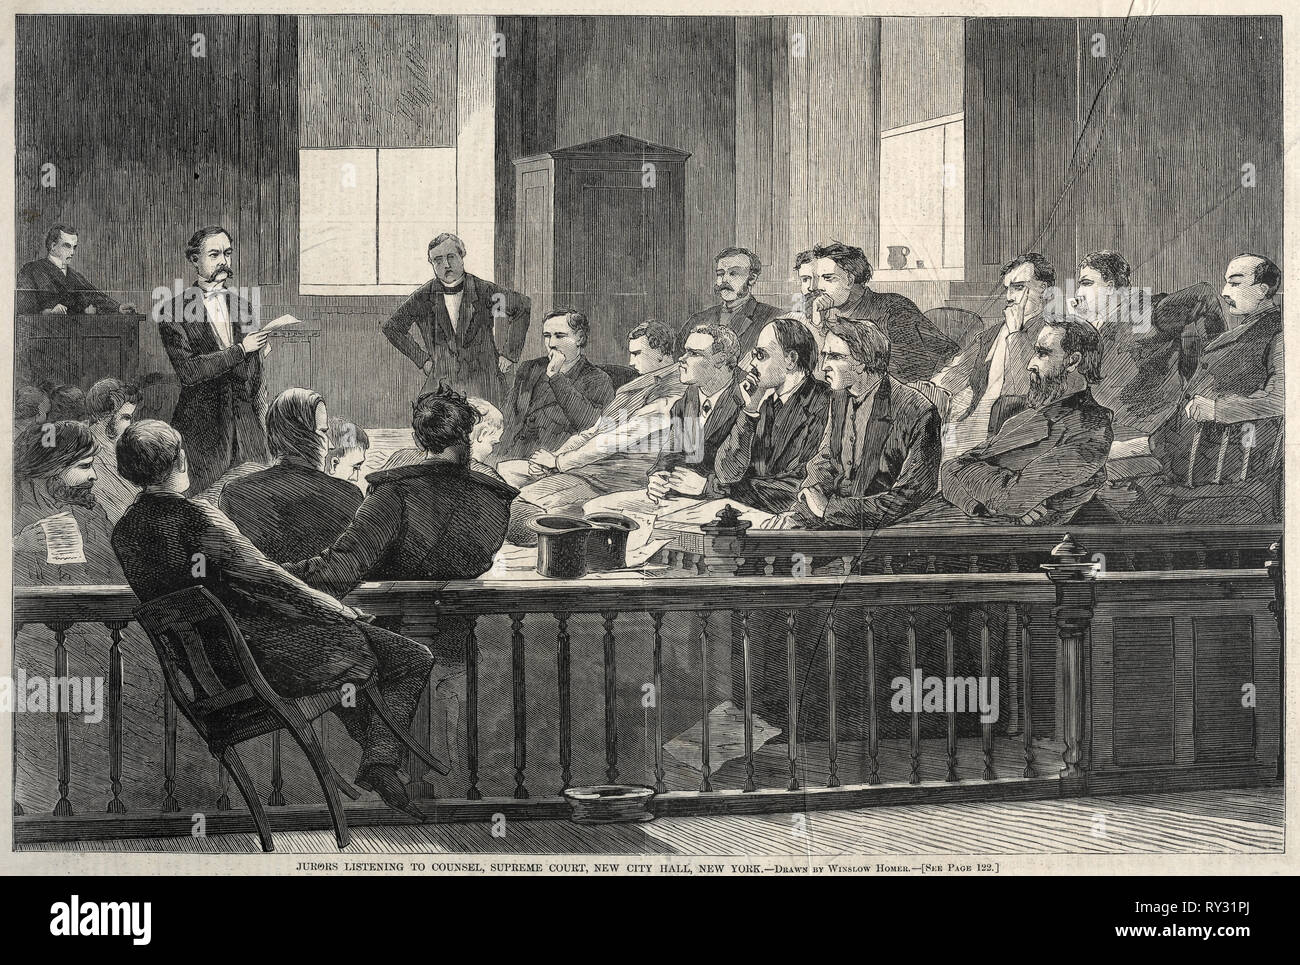 Jurors Listening to Counsel, Supreme Court, New City Hall, New York, 1869, Winslow Homer, American, 1836-1910 Stock Photo